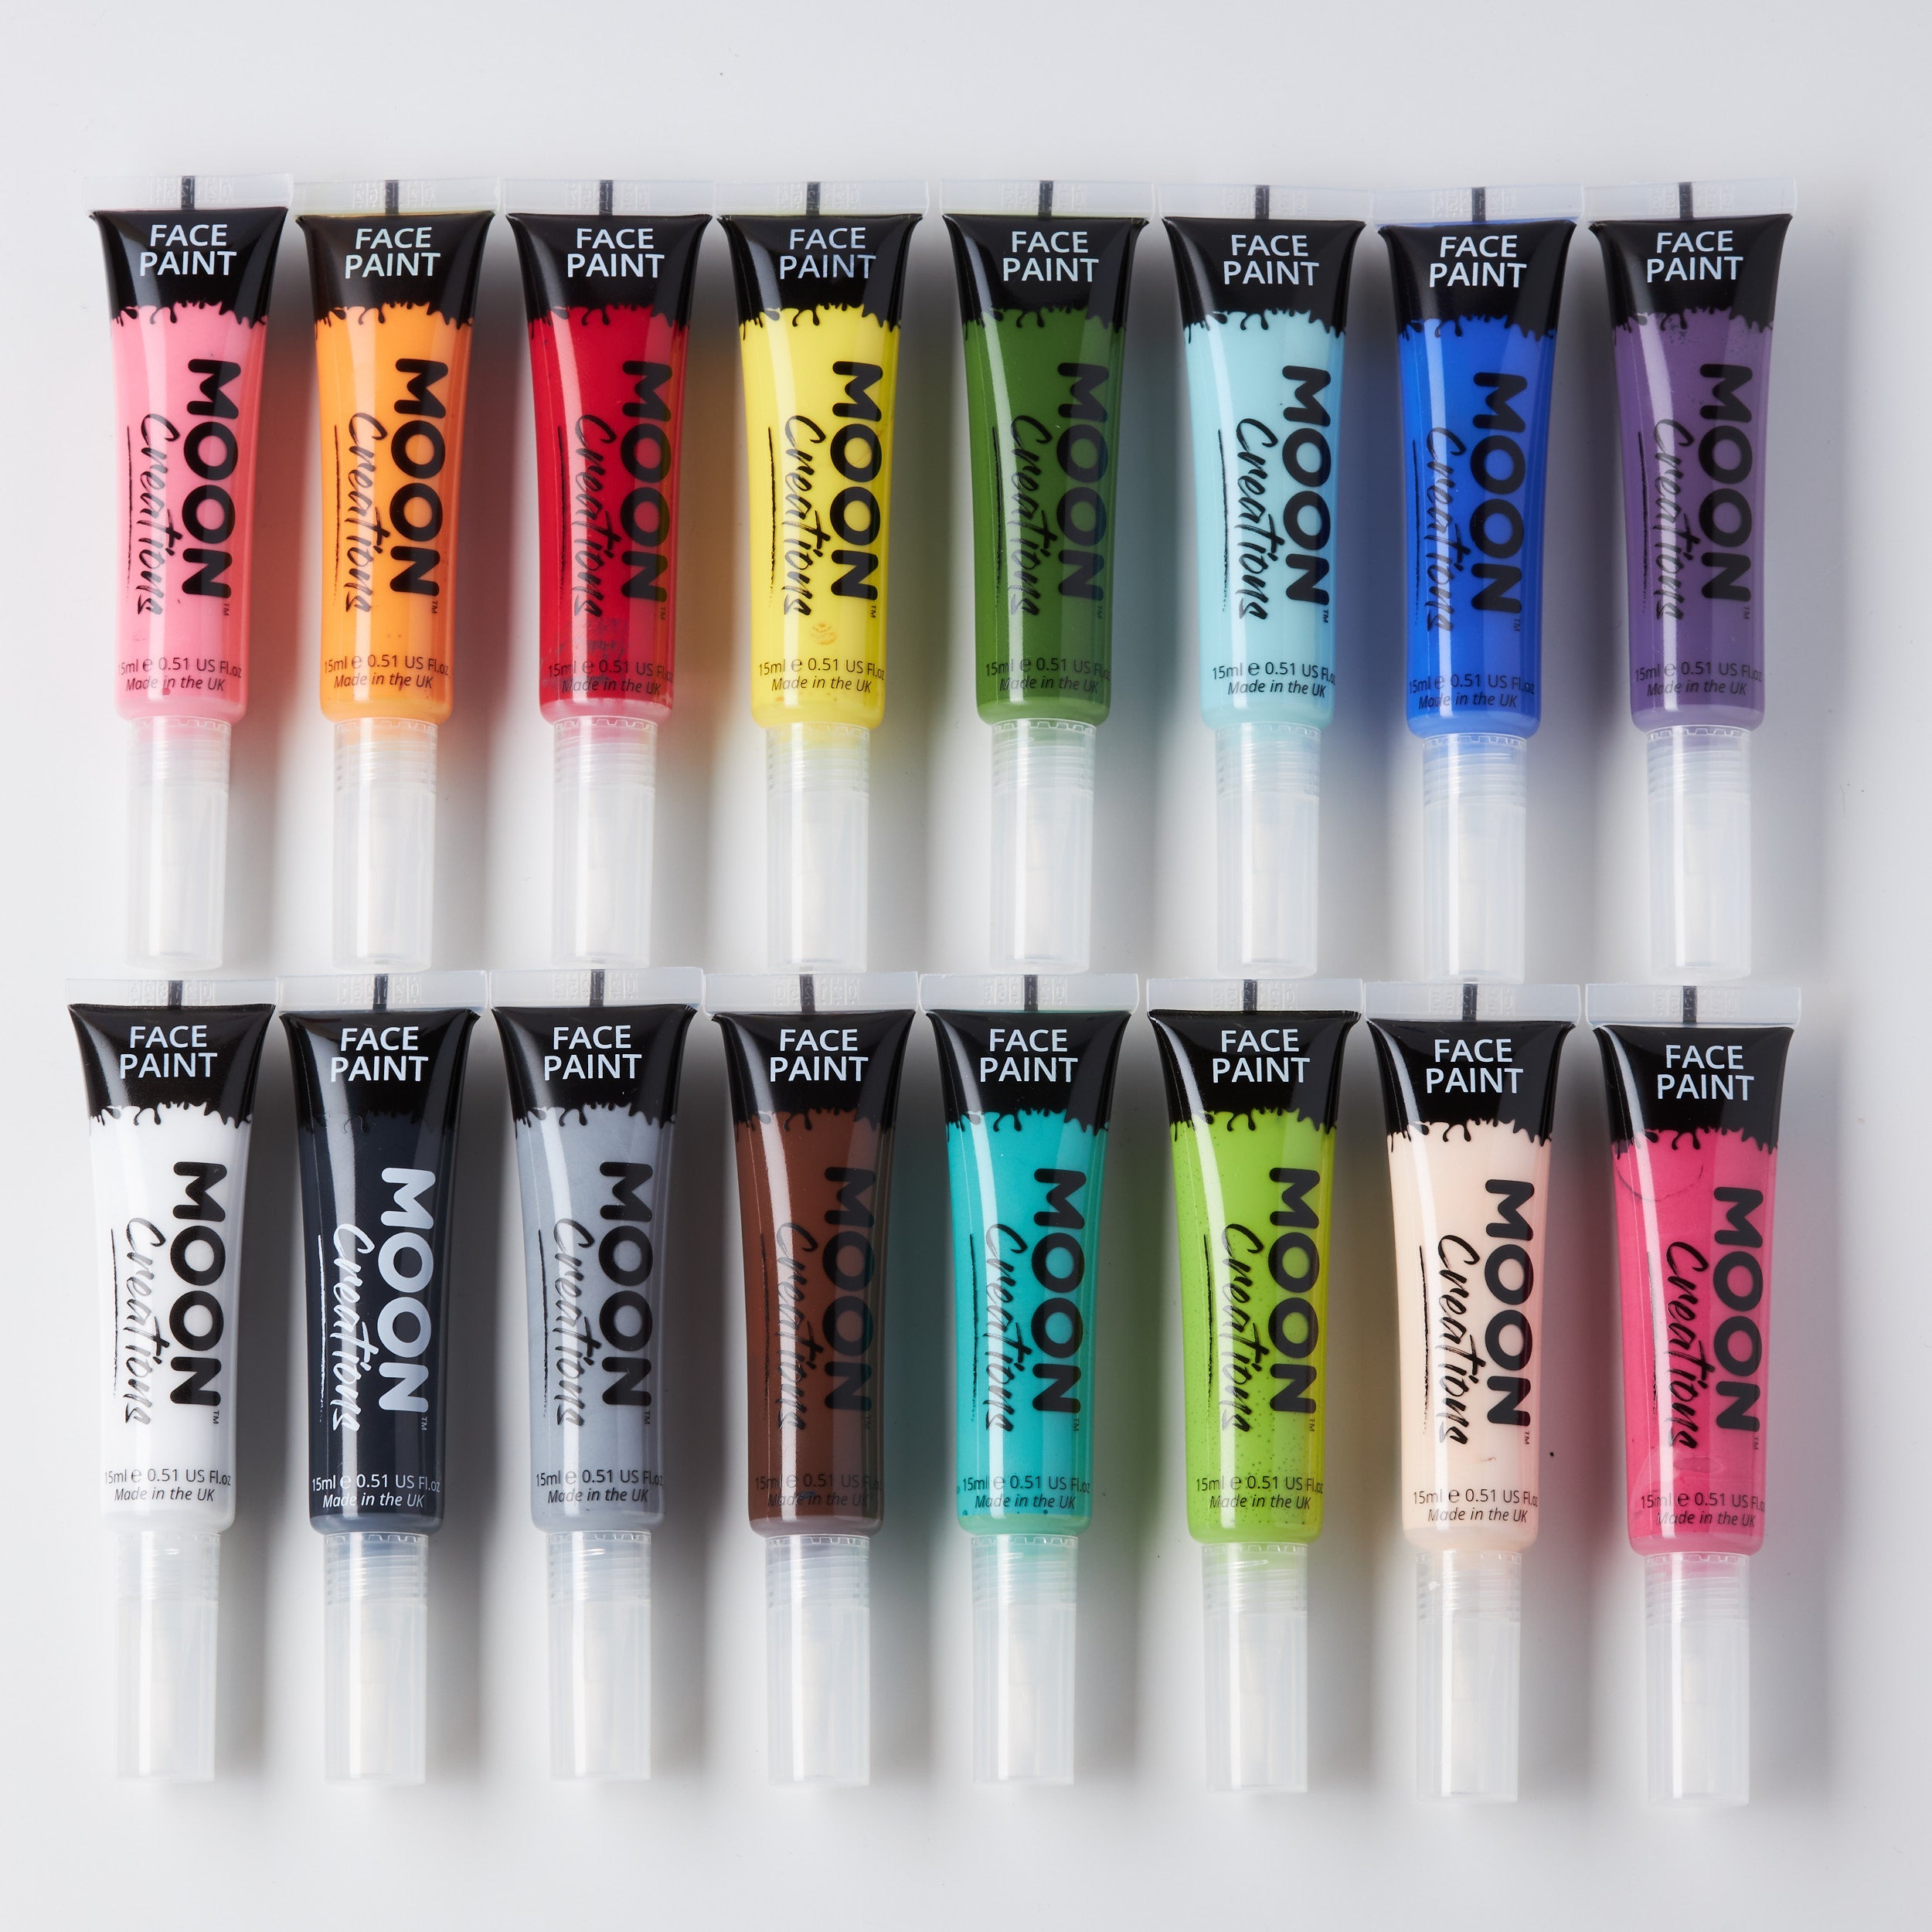 Face & Body Paint Makeup w/brush. Cosmetically certified, FDA & Health Canada compliant, cruelty free and vegan.